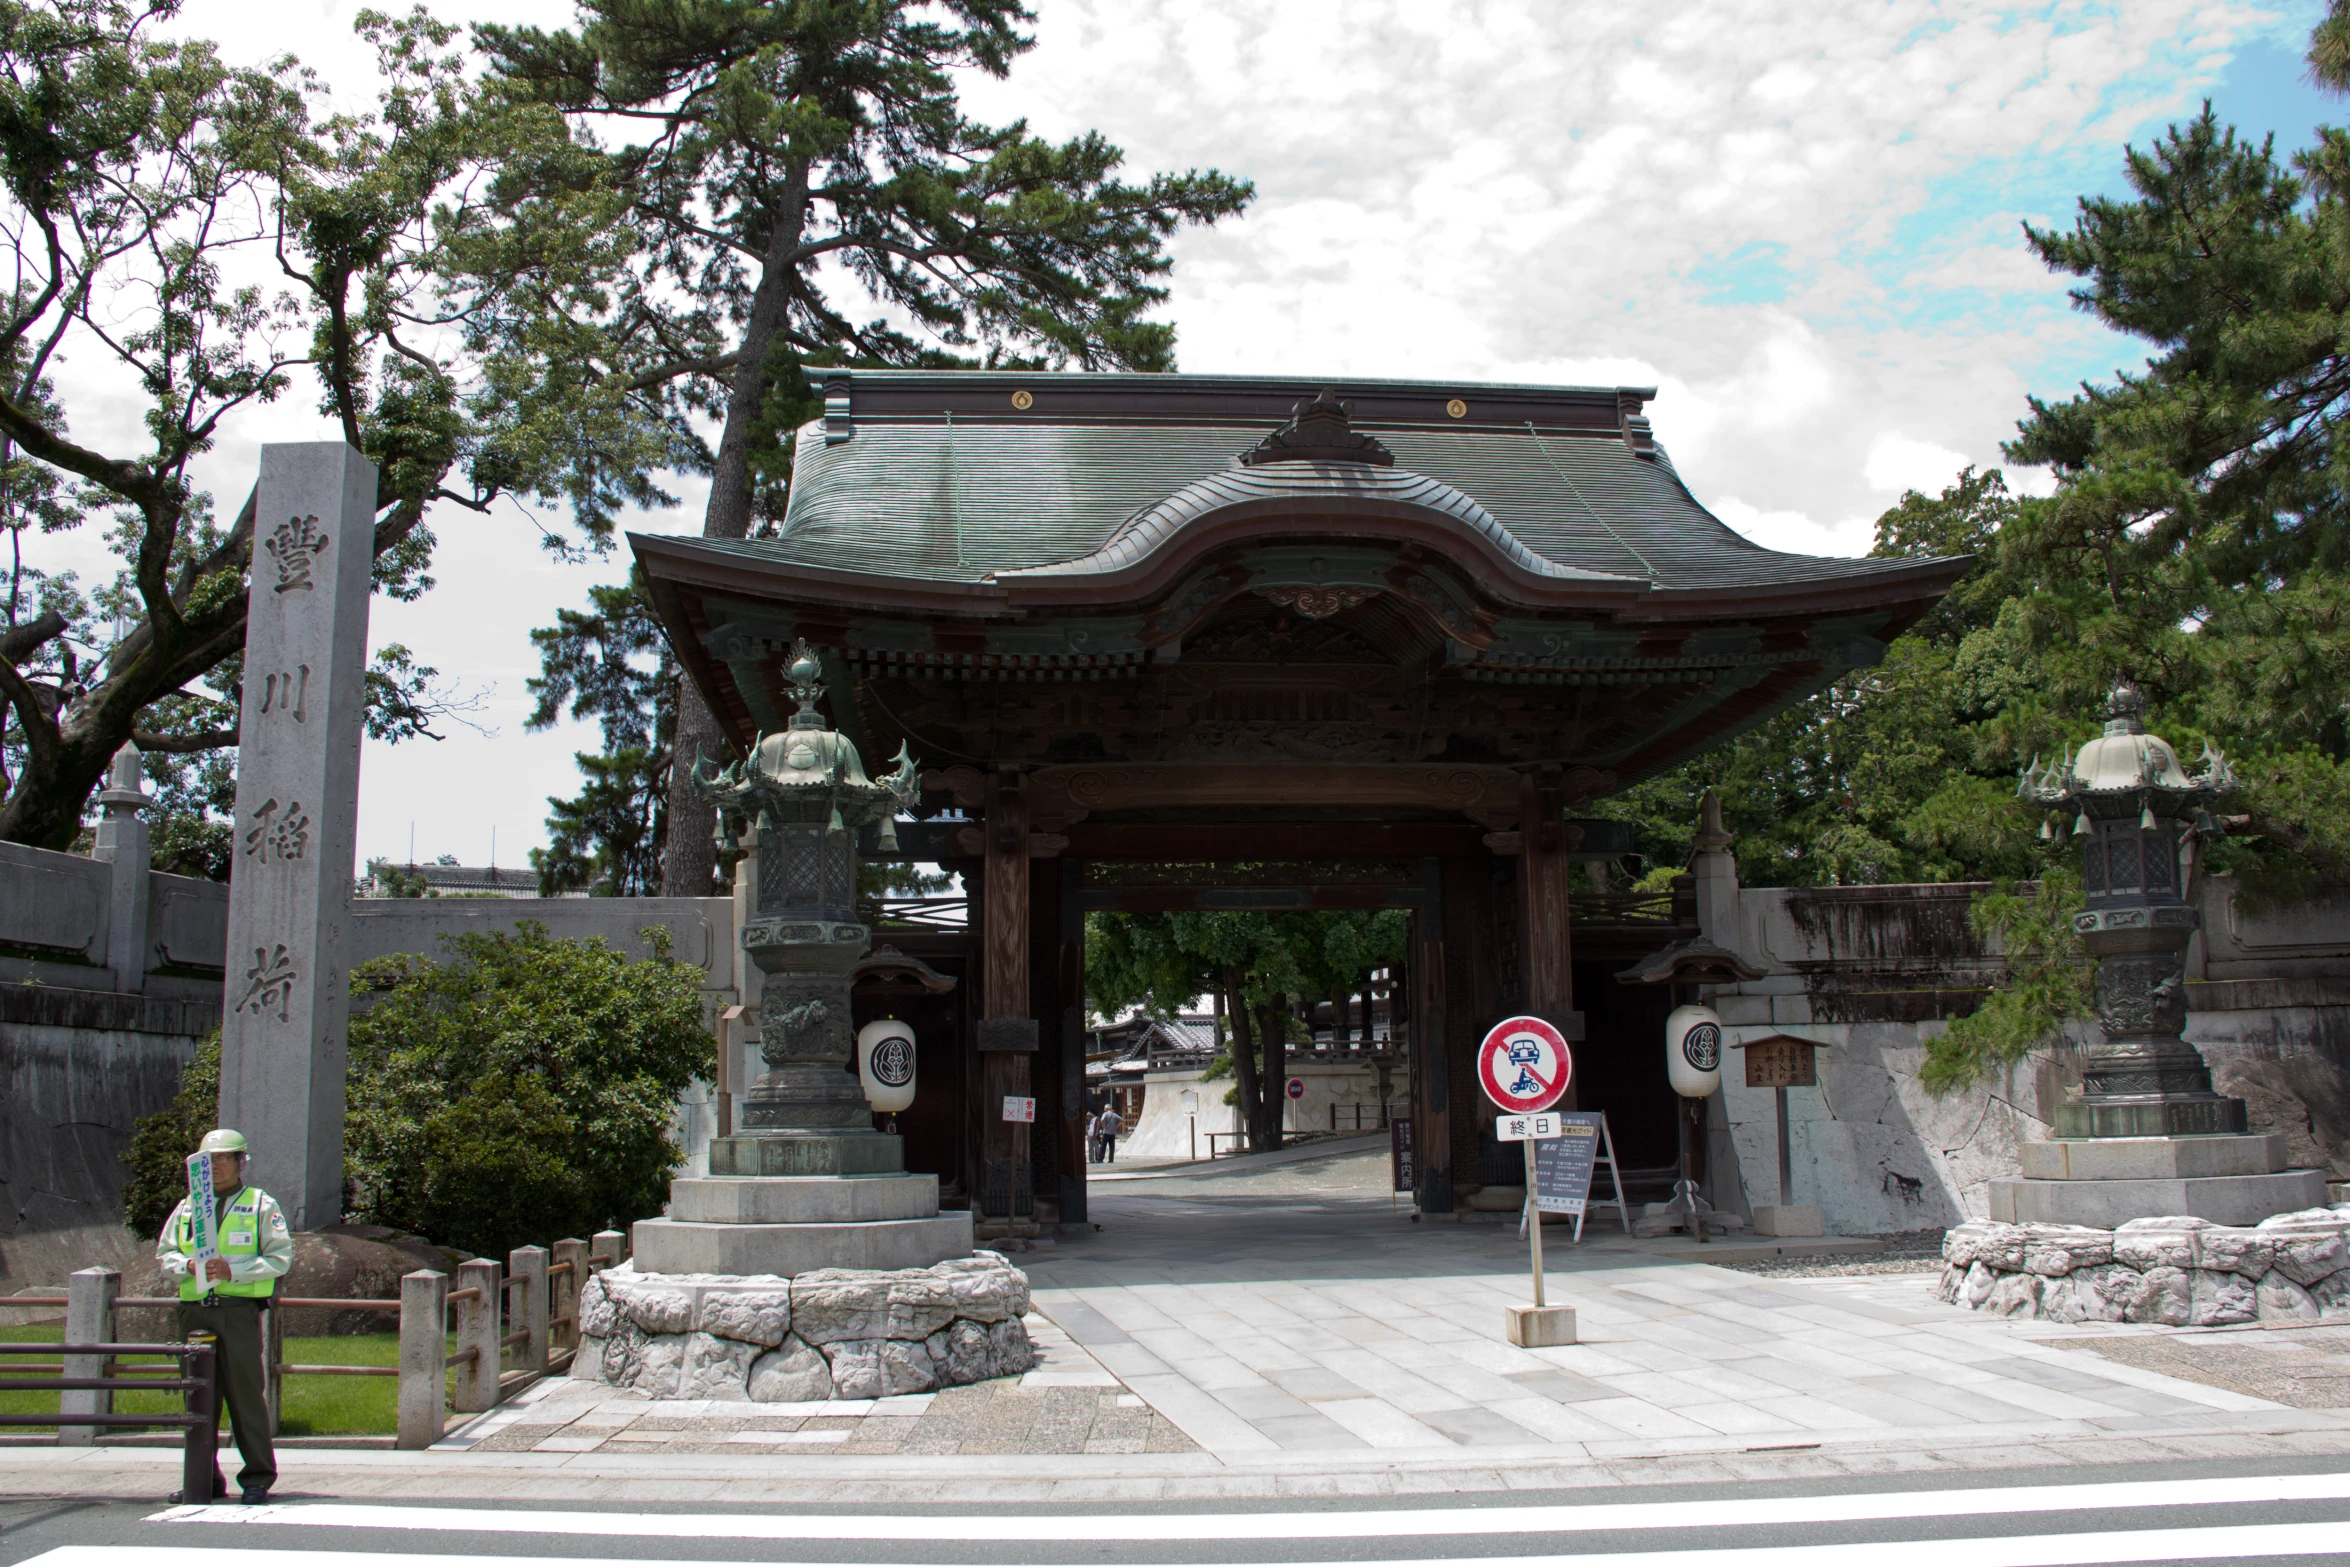 the oriental shrine has a cross at the entrance